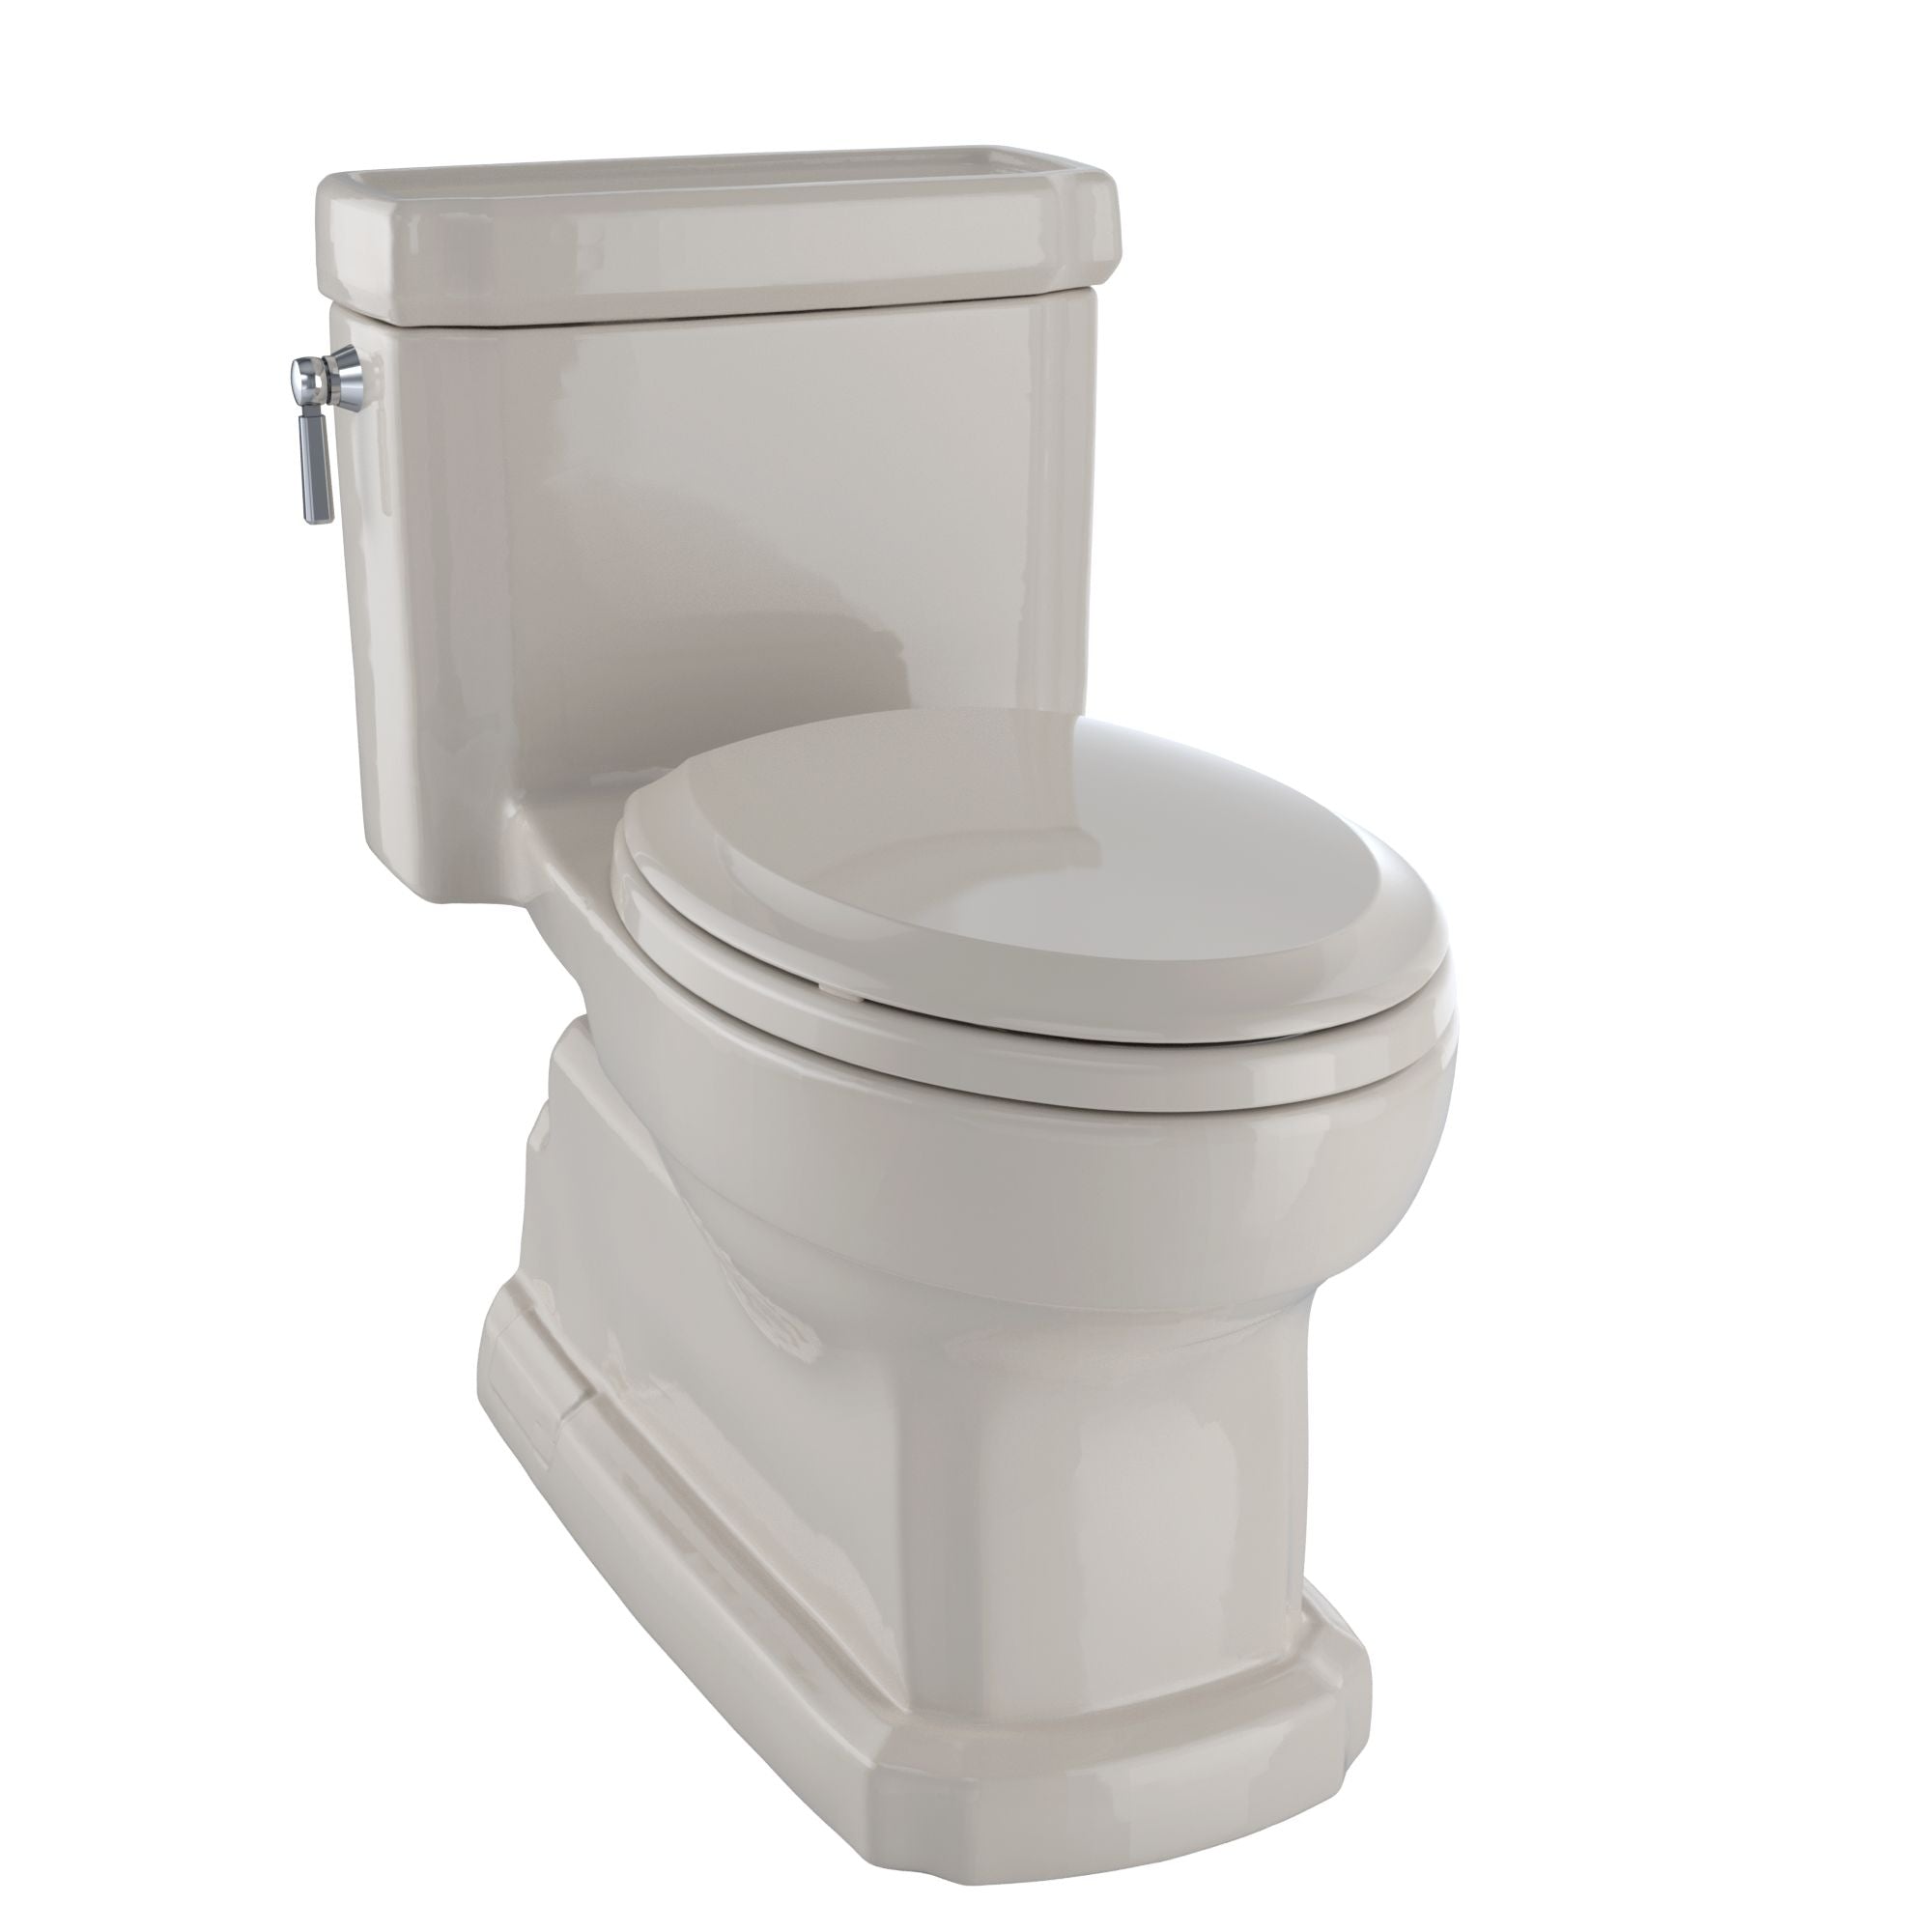 Toto Guinevere One-piece Toilet - 1.28 GPF